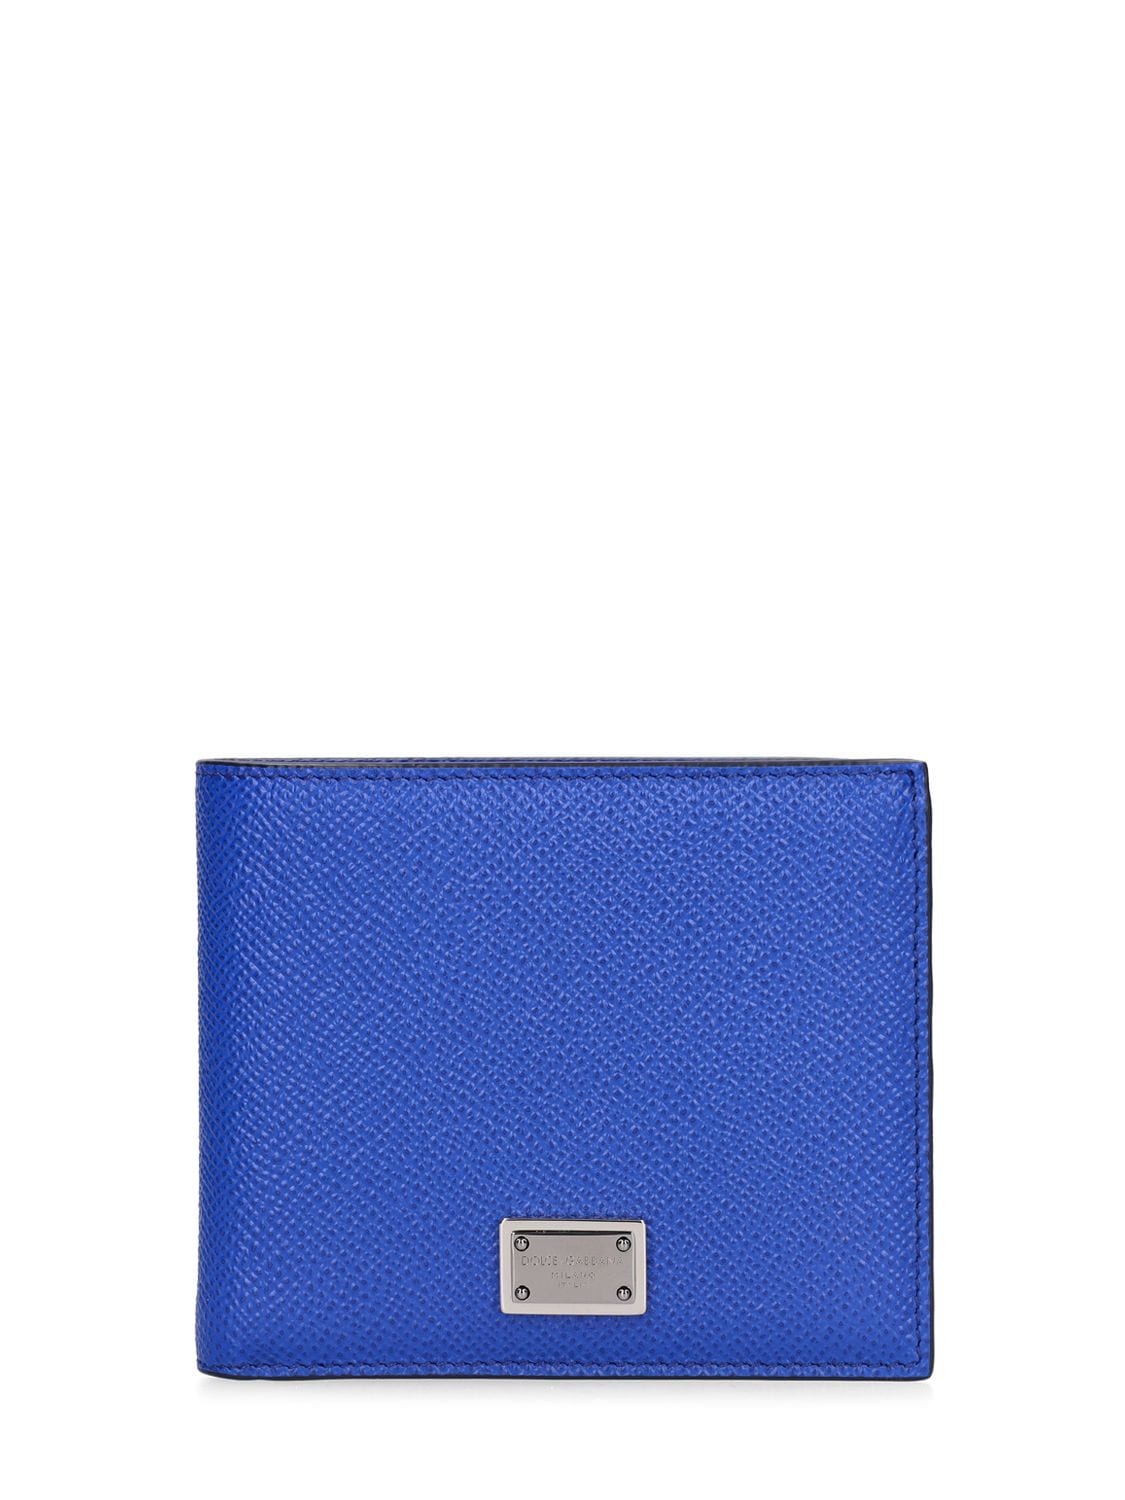 Dolce & Gabbana Logo Plaque Leather Wallet In Bright Blue